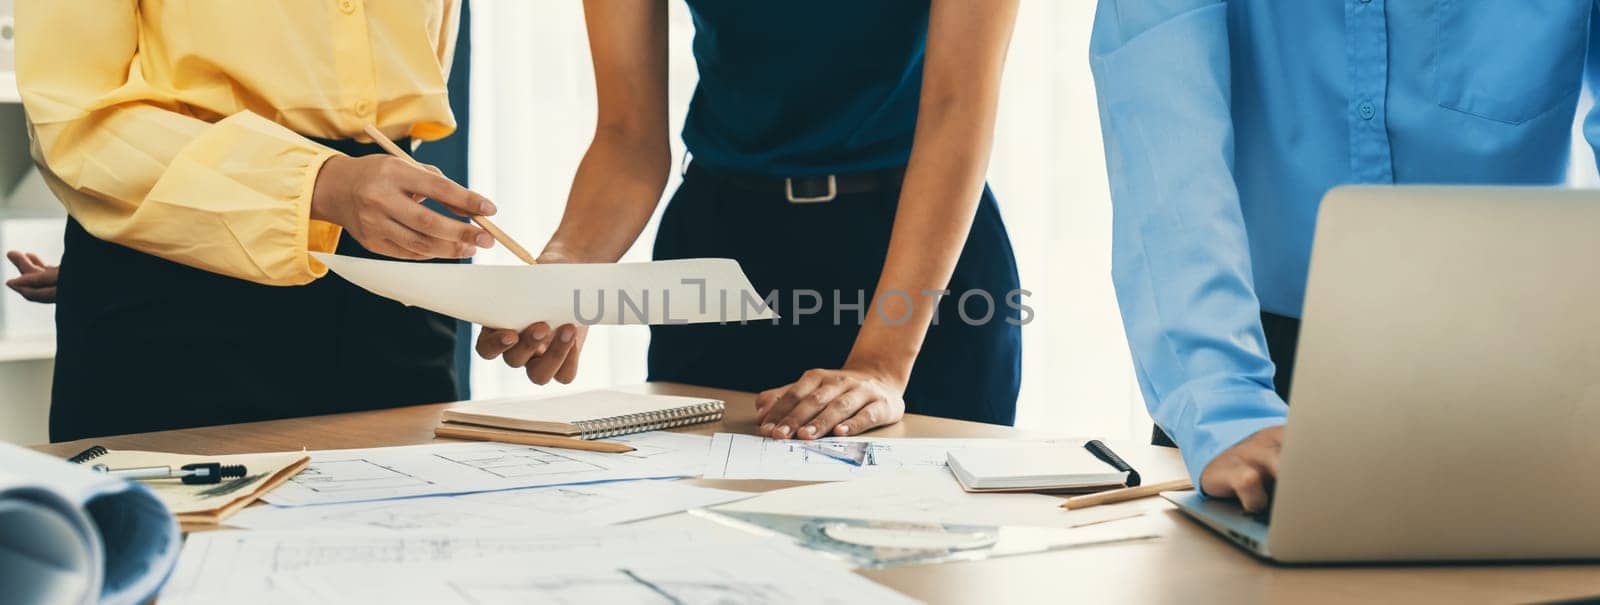 Architect team discuss about blueprint design at modern meeting room while her coworker working on laptop on table with blueprint and architectural equipment scattered around. Closeup. Delineation.